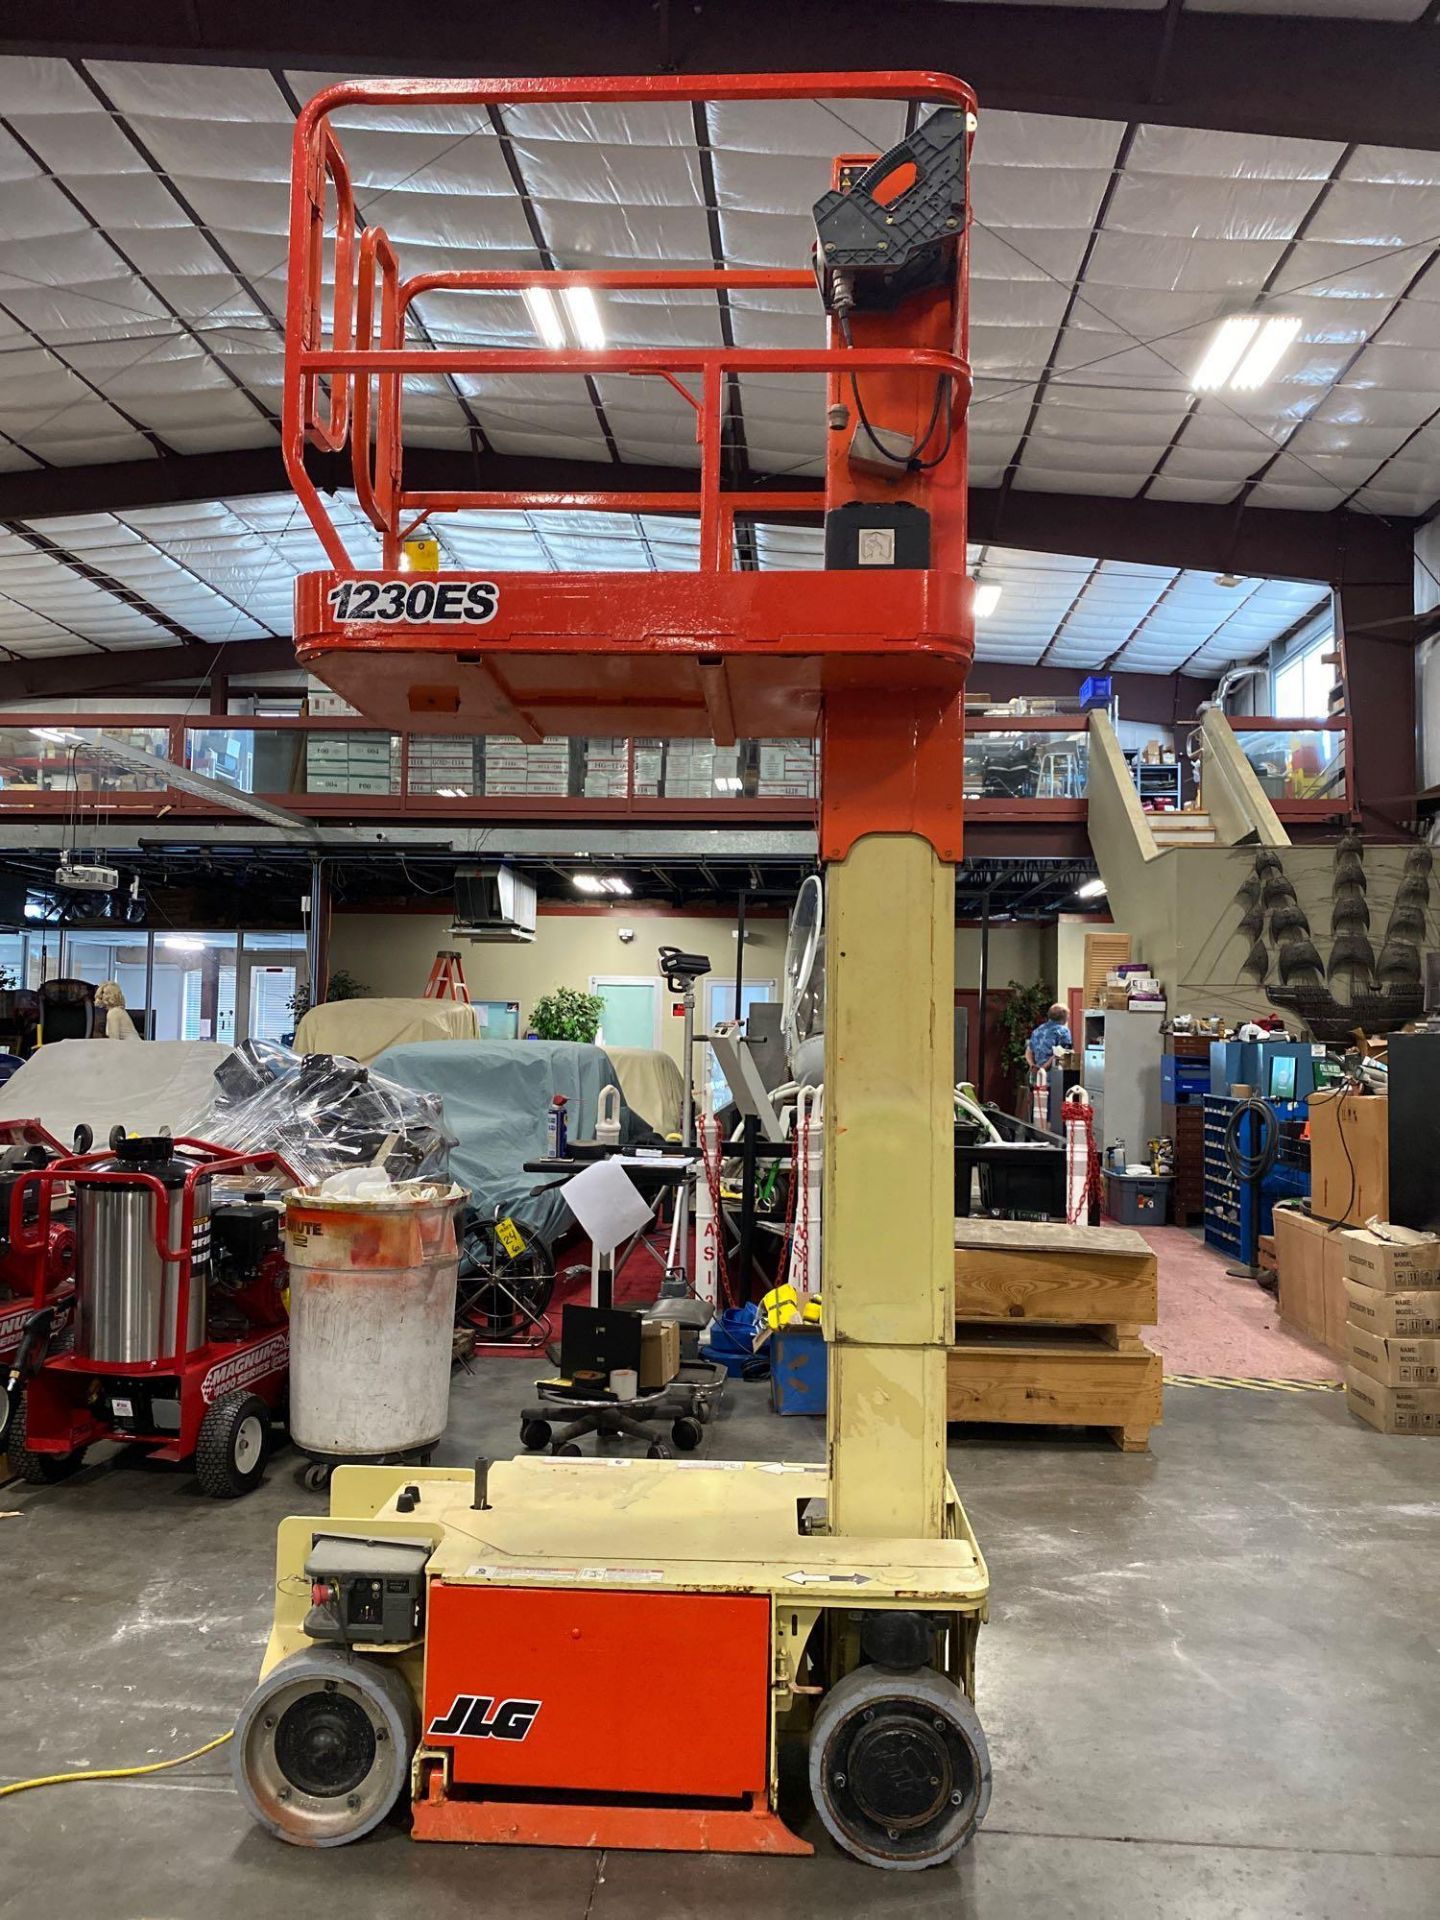 JLG 1230ES SCISSOR LIFT, 12' MAX PLATFORM HEIGHT, BUILT IN BATTERY CHARGER, NON MARKING TIRES, RUNS - Image 6 of 6